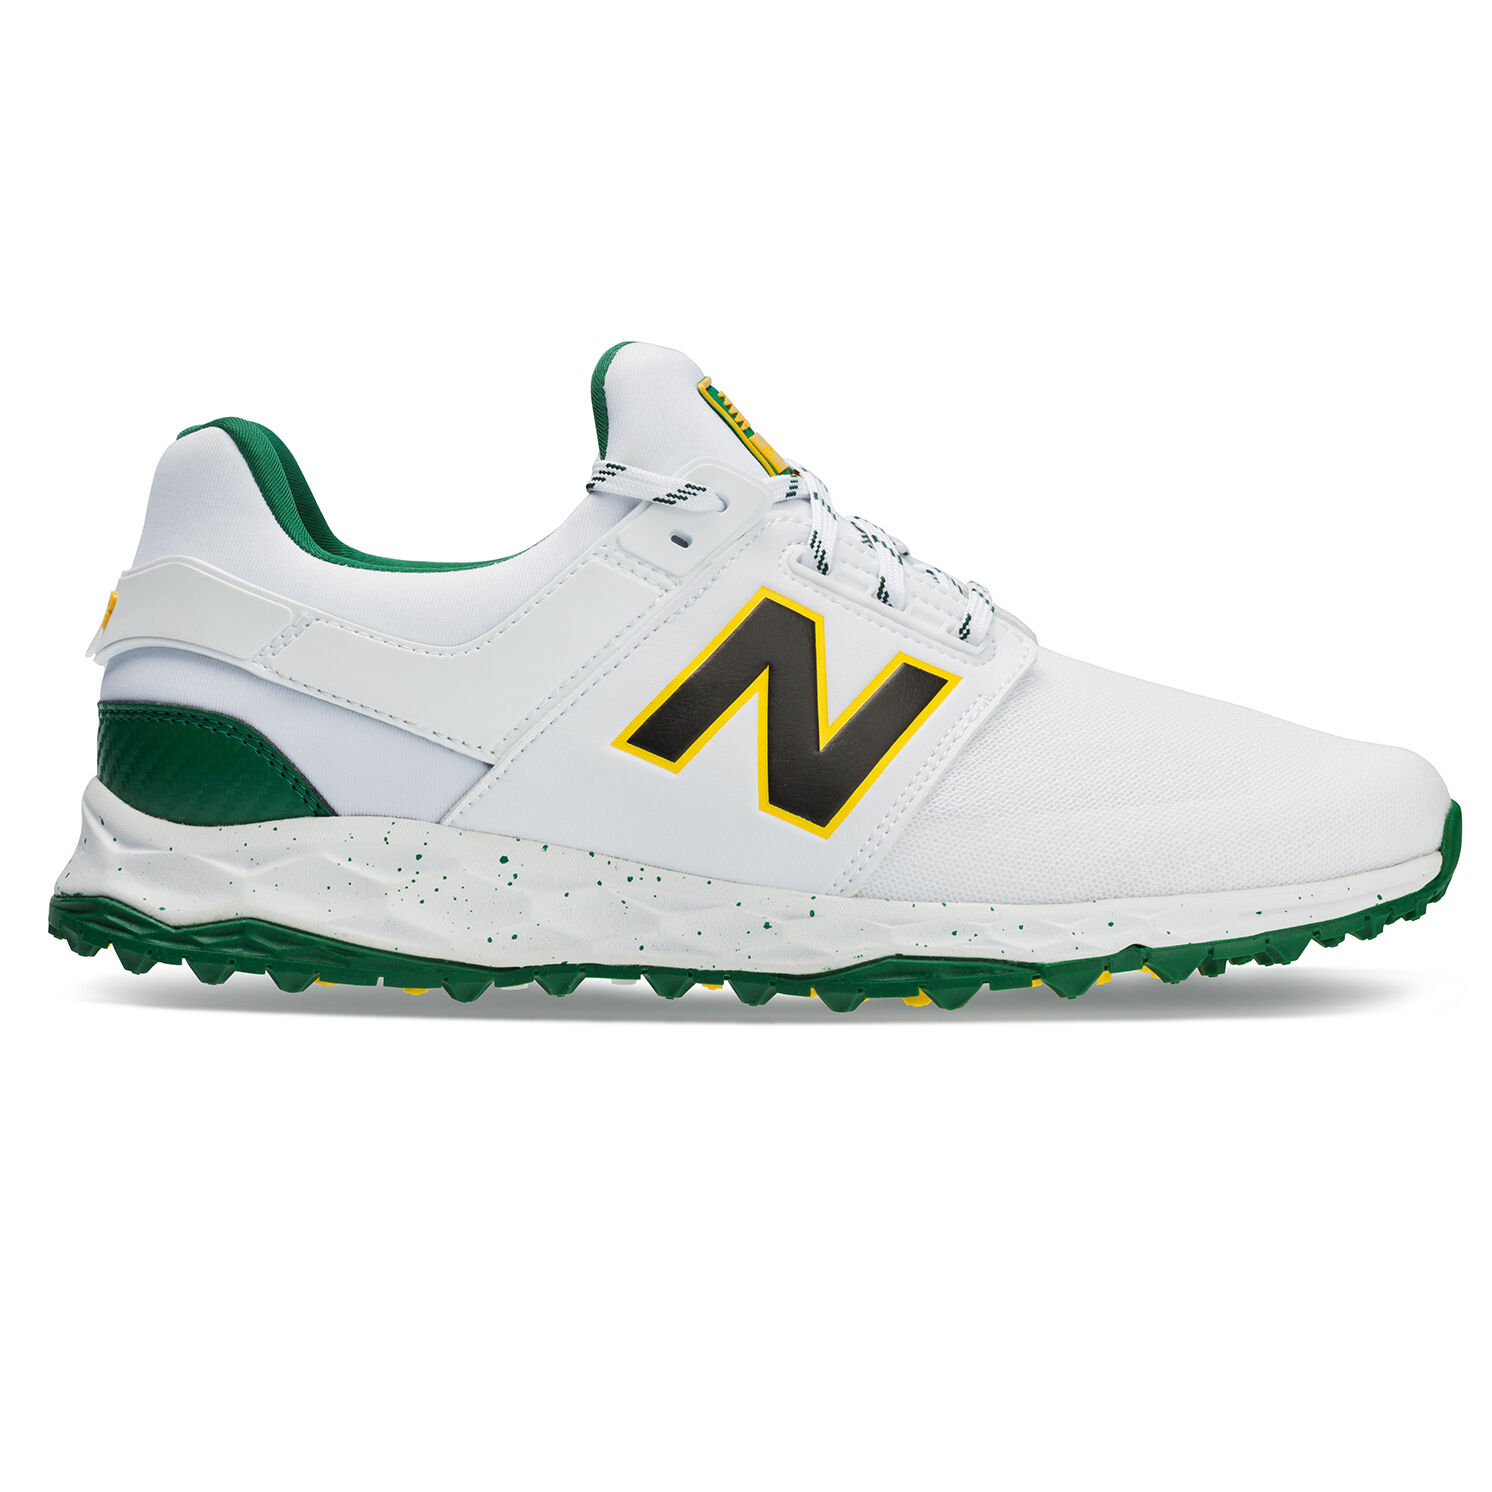 discount new balance golf shoes